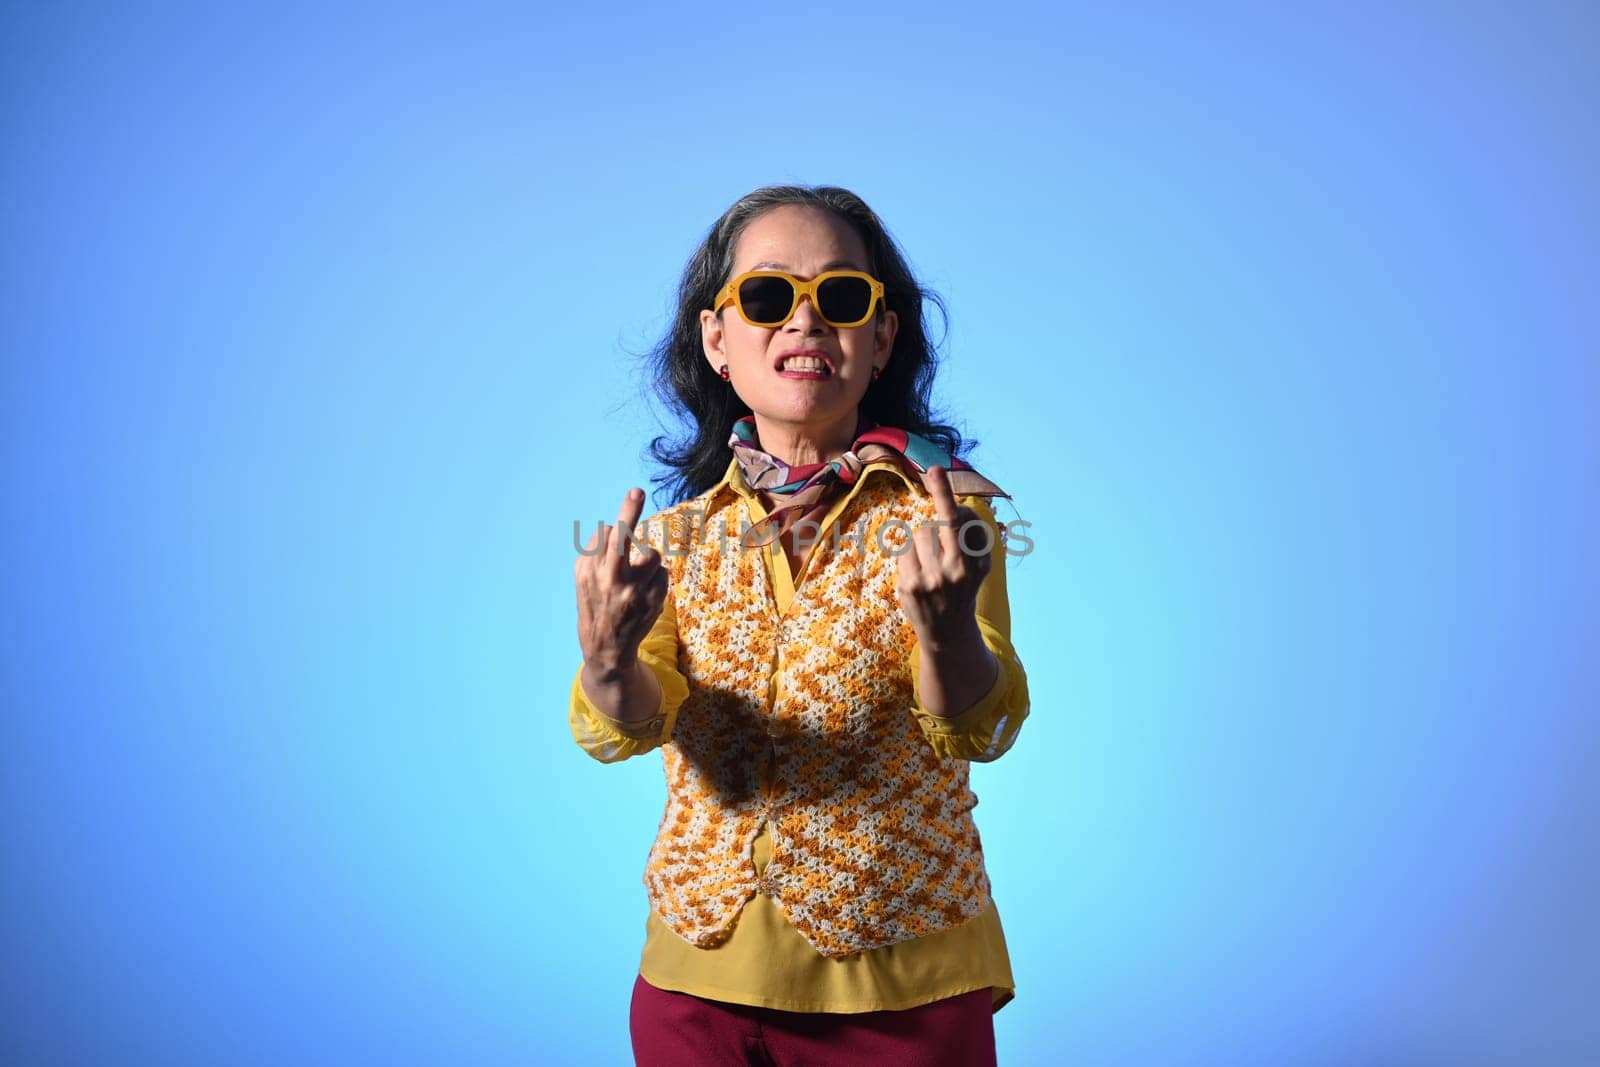 Crazy senior woman wearing sunglasses showing middle finger gesture over blue background.